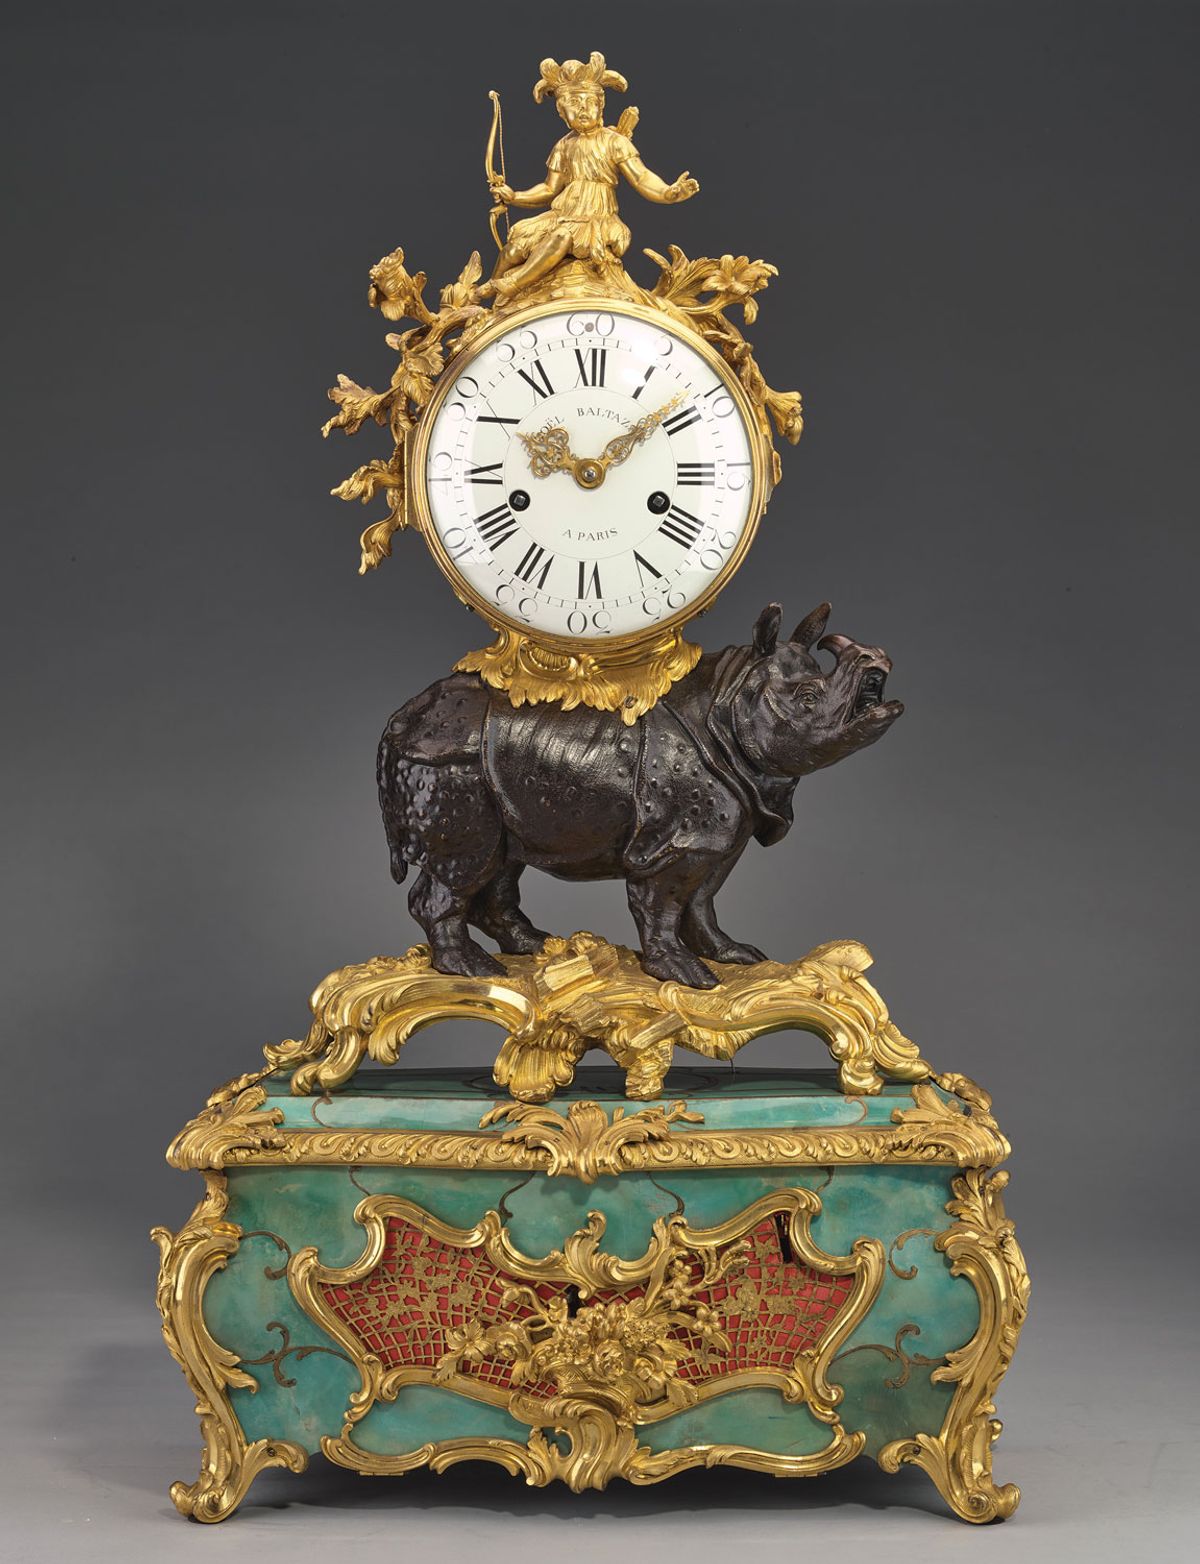 Clara inspired numerous artistic depictions, including this 1750 clock by Jean-Joseph de Saint-Germain

Parnassia Collection; courtesy of the Rijksmuseum



